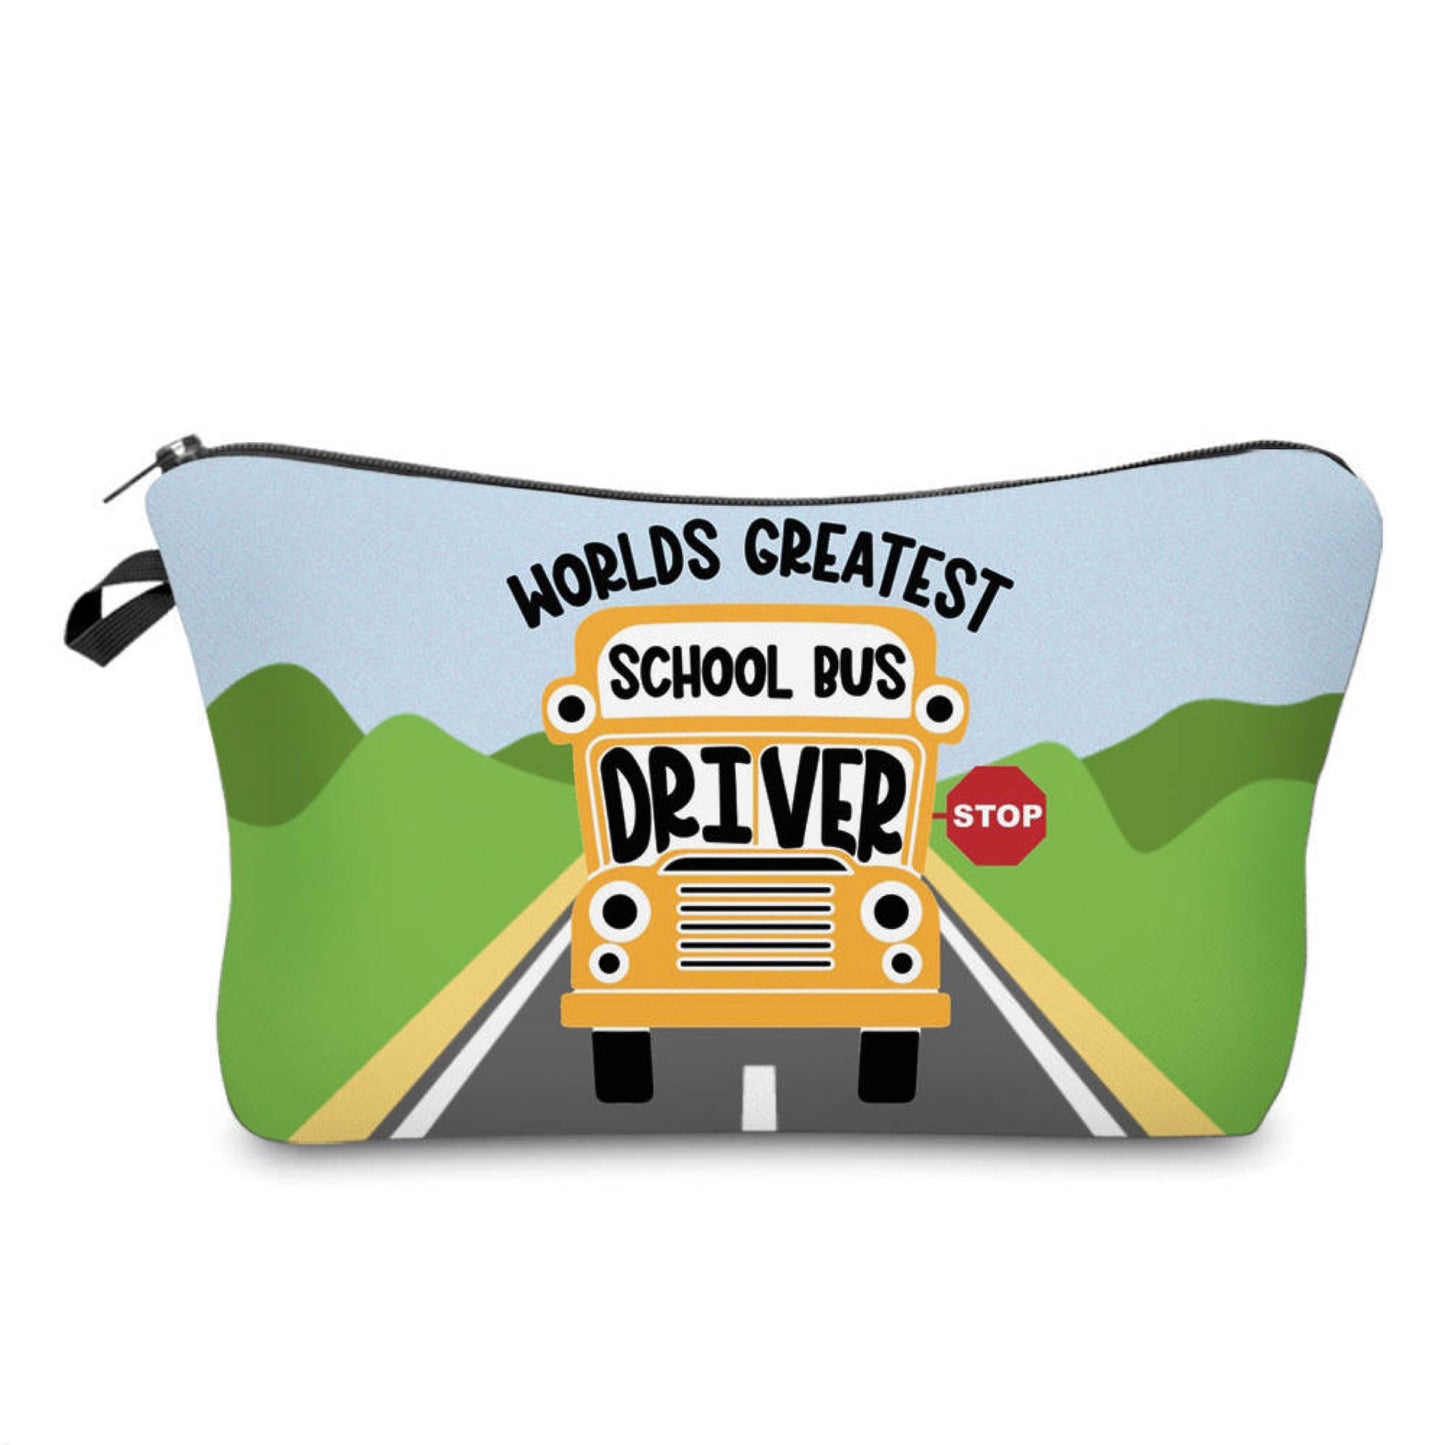 Worlds Greatest School Bus Driver - Water-Resistant Multi-Use Pouch